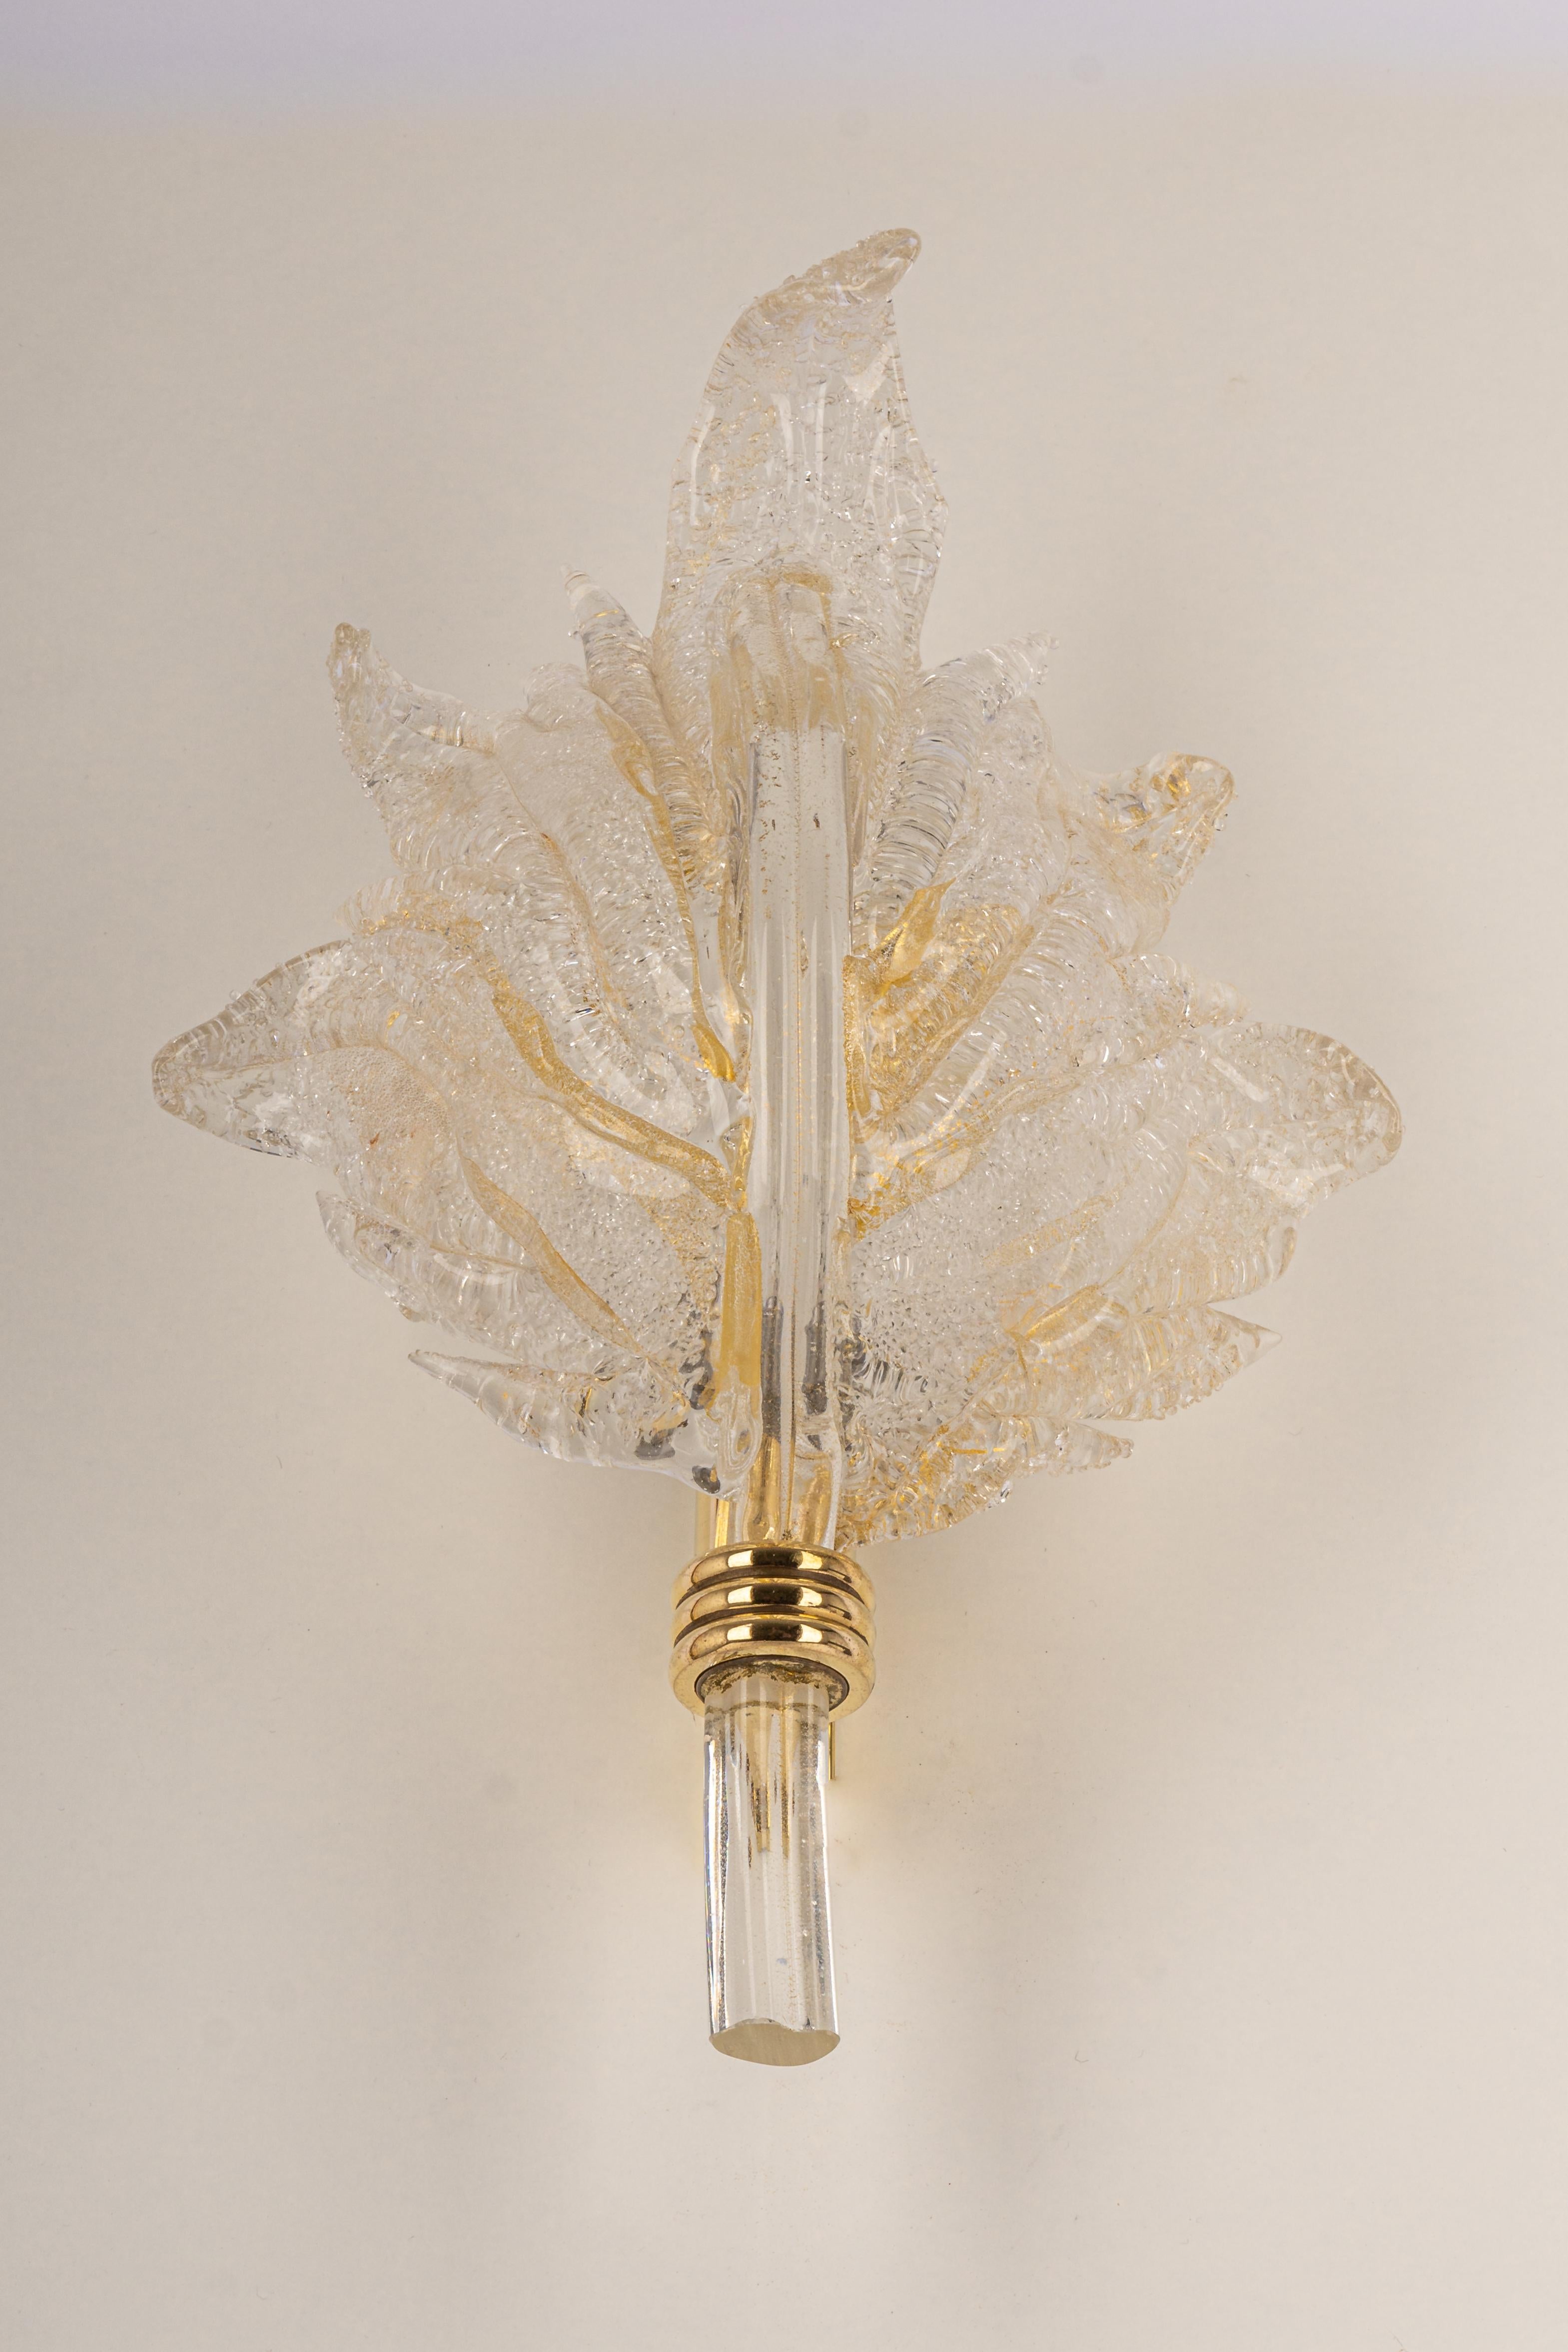 Large Murano Wall light made by Barovier & Toso, Italy, circa 1970-1979.
High quality and in very good condition. Cleaned, well-wired and ready to use.
Brass Frame.
The sconce requires 1 x E14 small bulb with 60 W max and is compatible with the